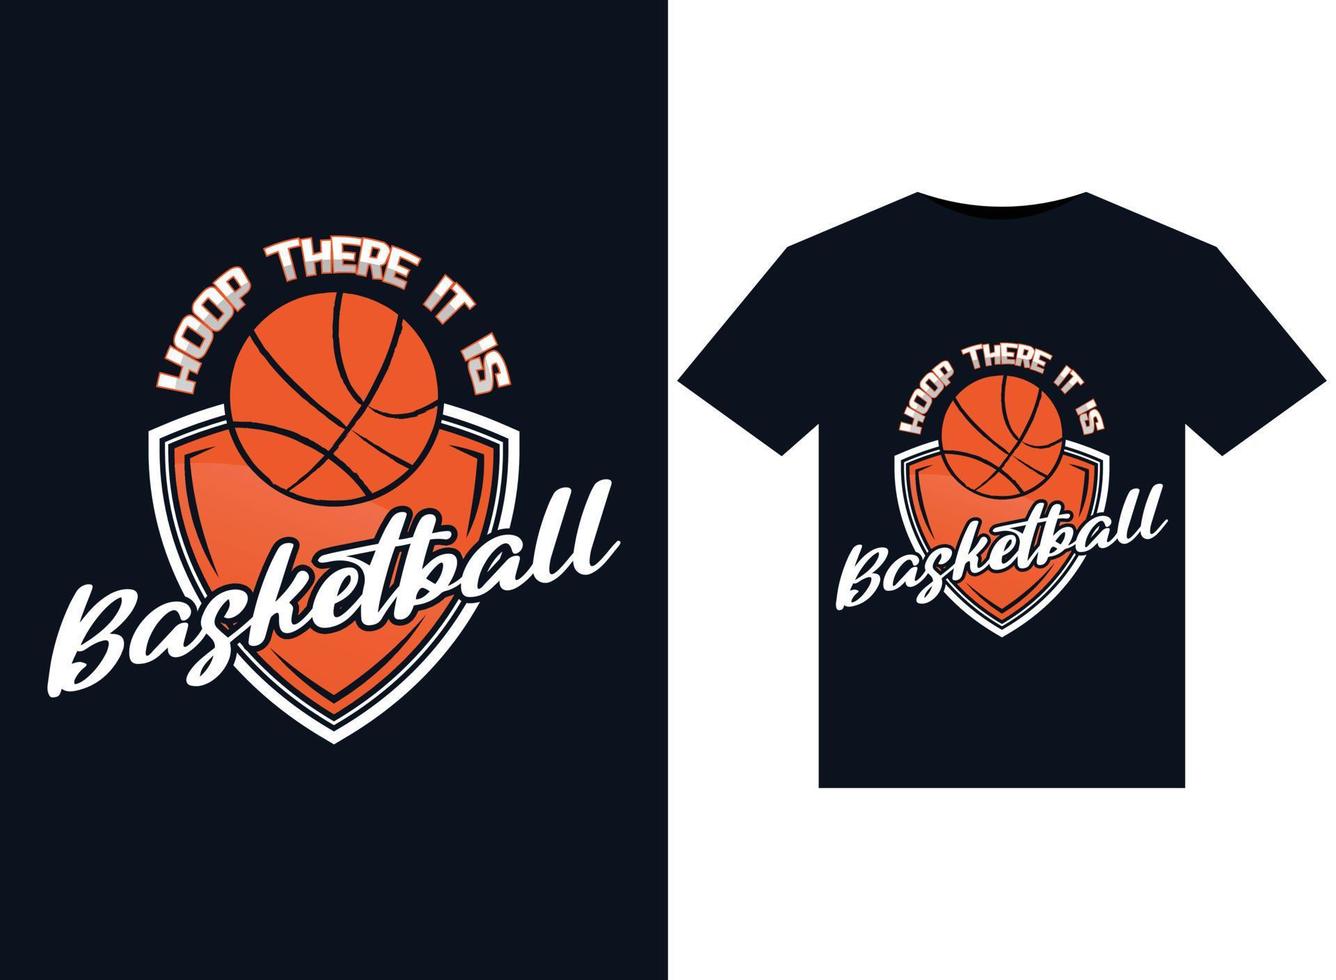 Hoop There It Is Basketball illustrations for the print-ready T-Shirts design vector